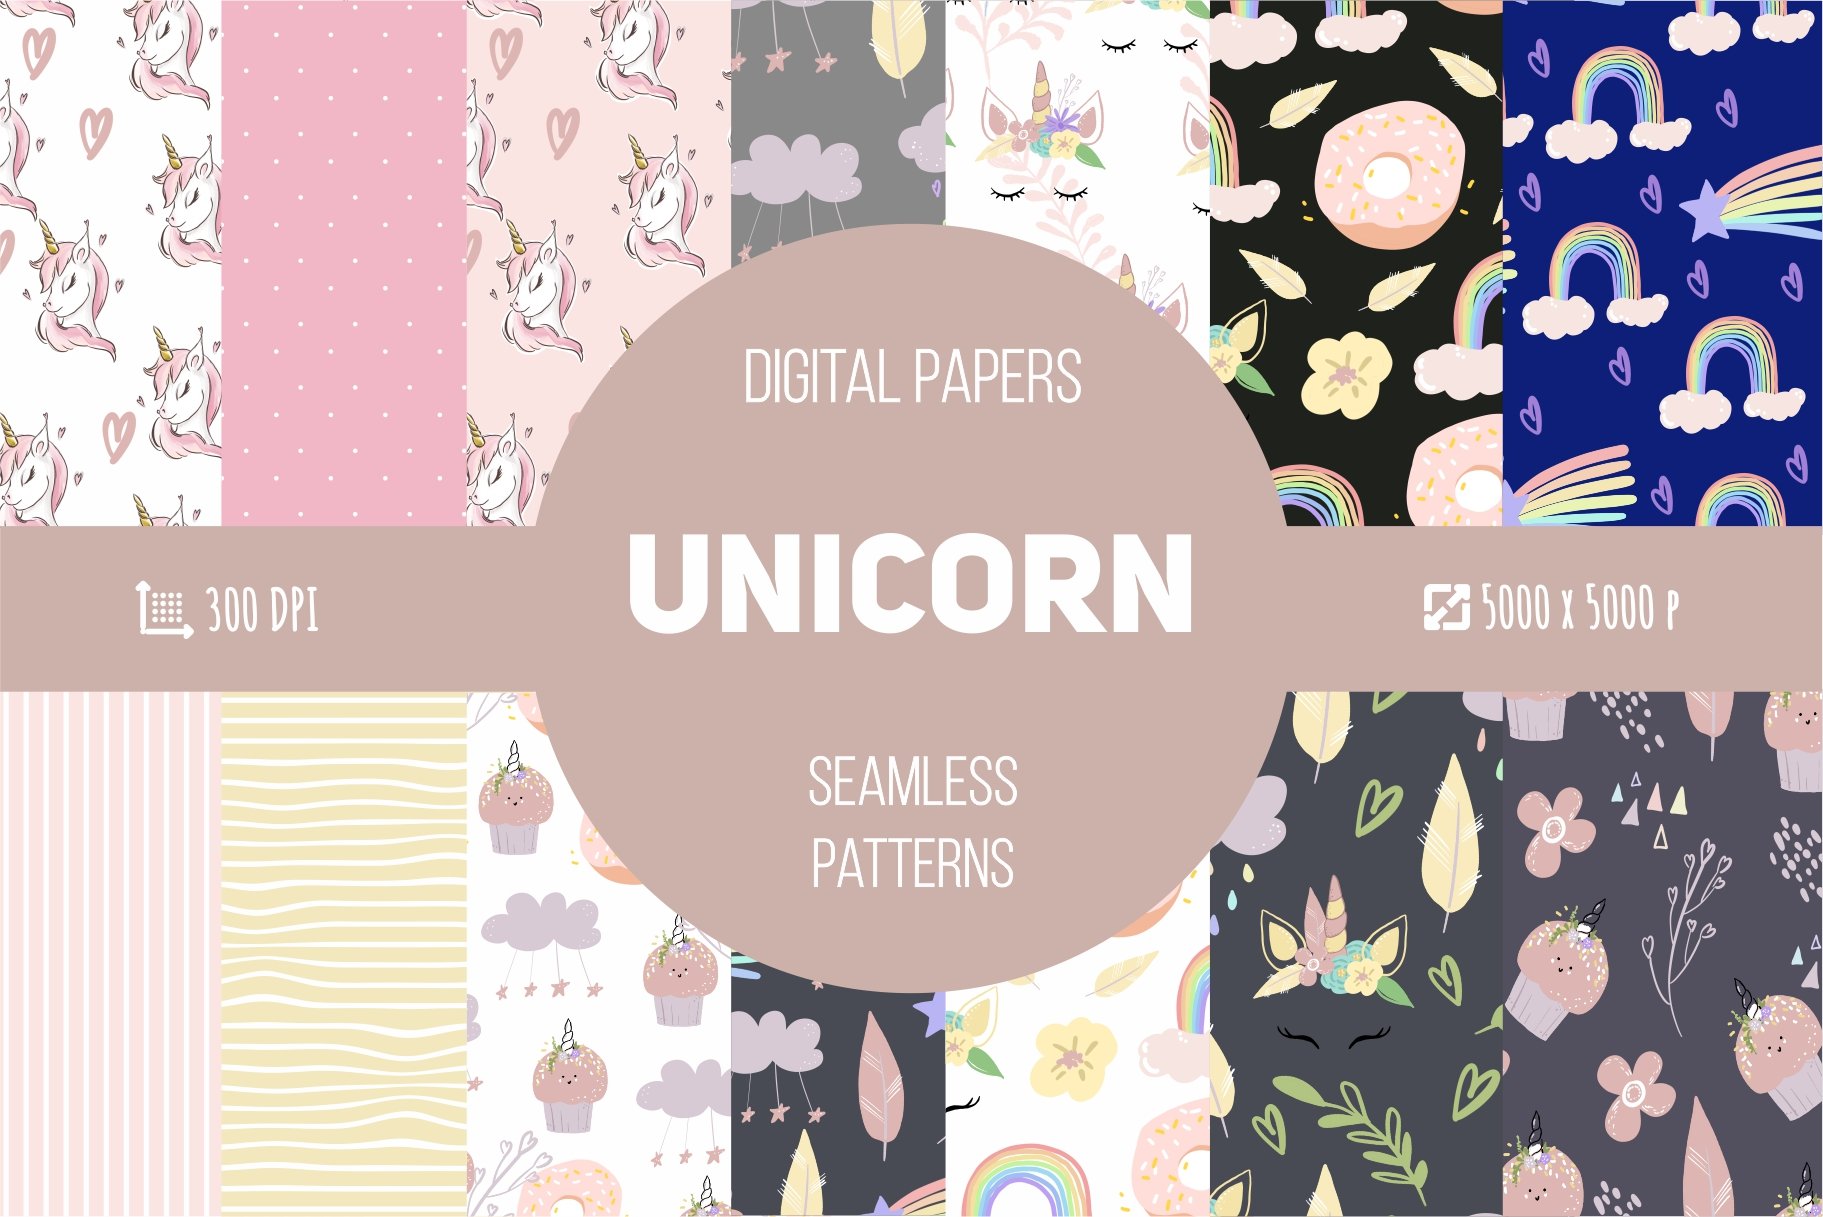 Unicorn patterns. Digital papers cover image.